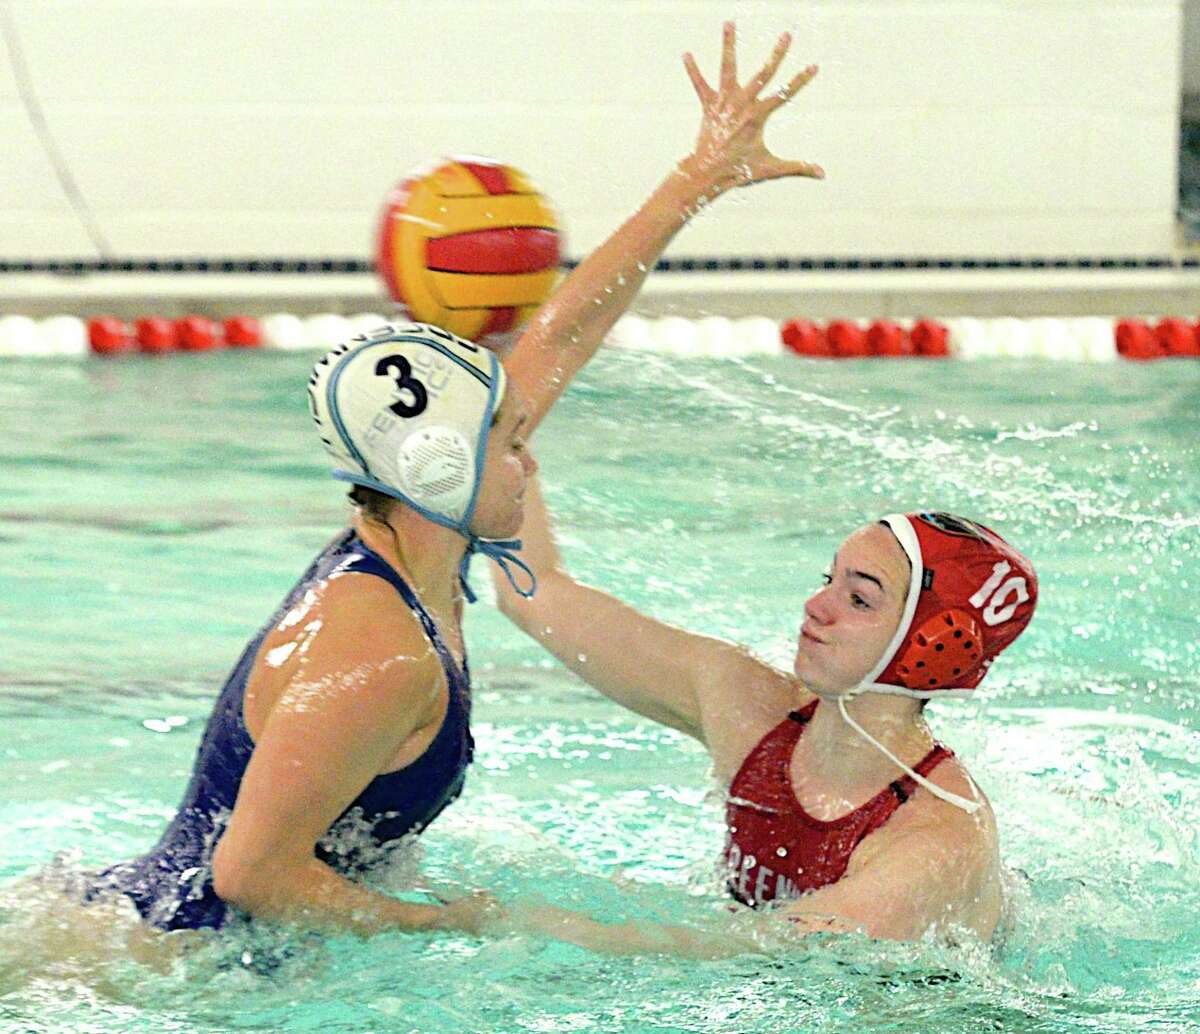 Annie Robinson of Greenwich High School, right, looks to pass the ball while being defended by Ally Furano of Greenwich Aquatics during a game at the Greenwich High School Girls Water Polo Tournament Saturday, May 12, 2017.